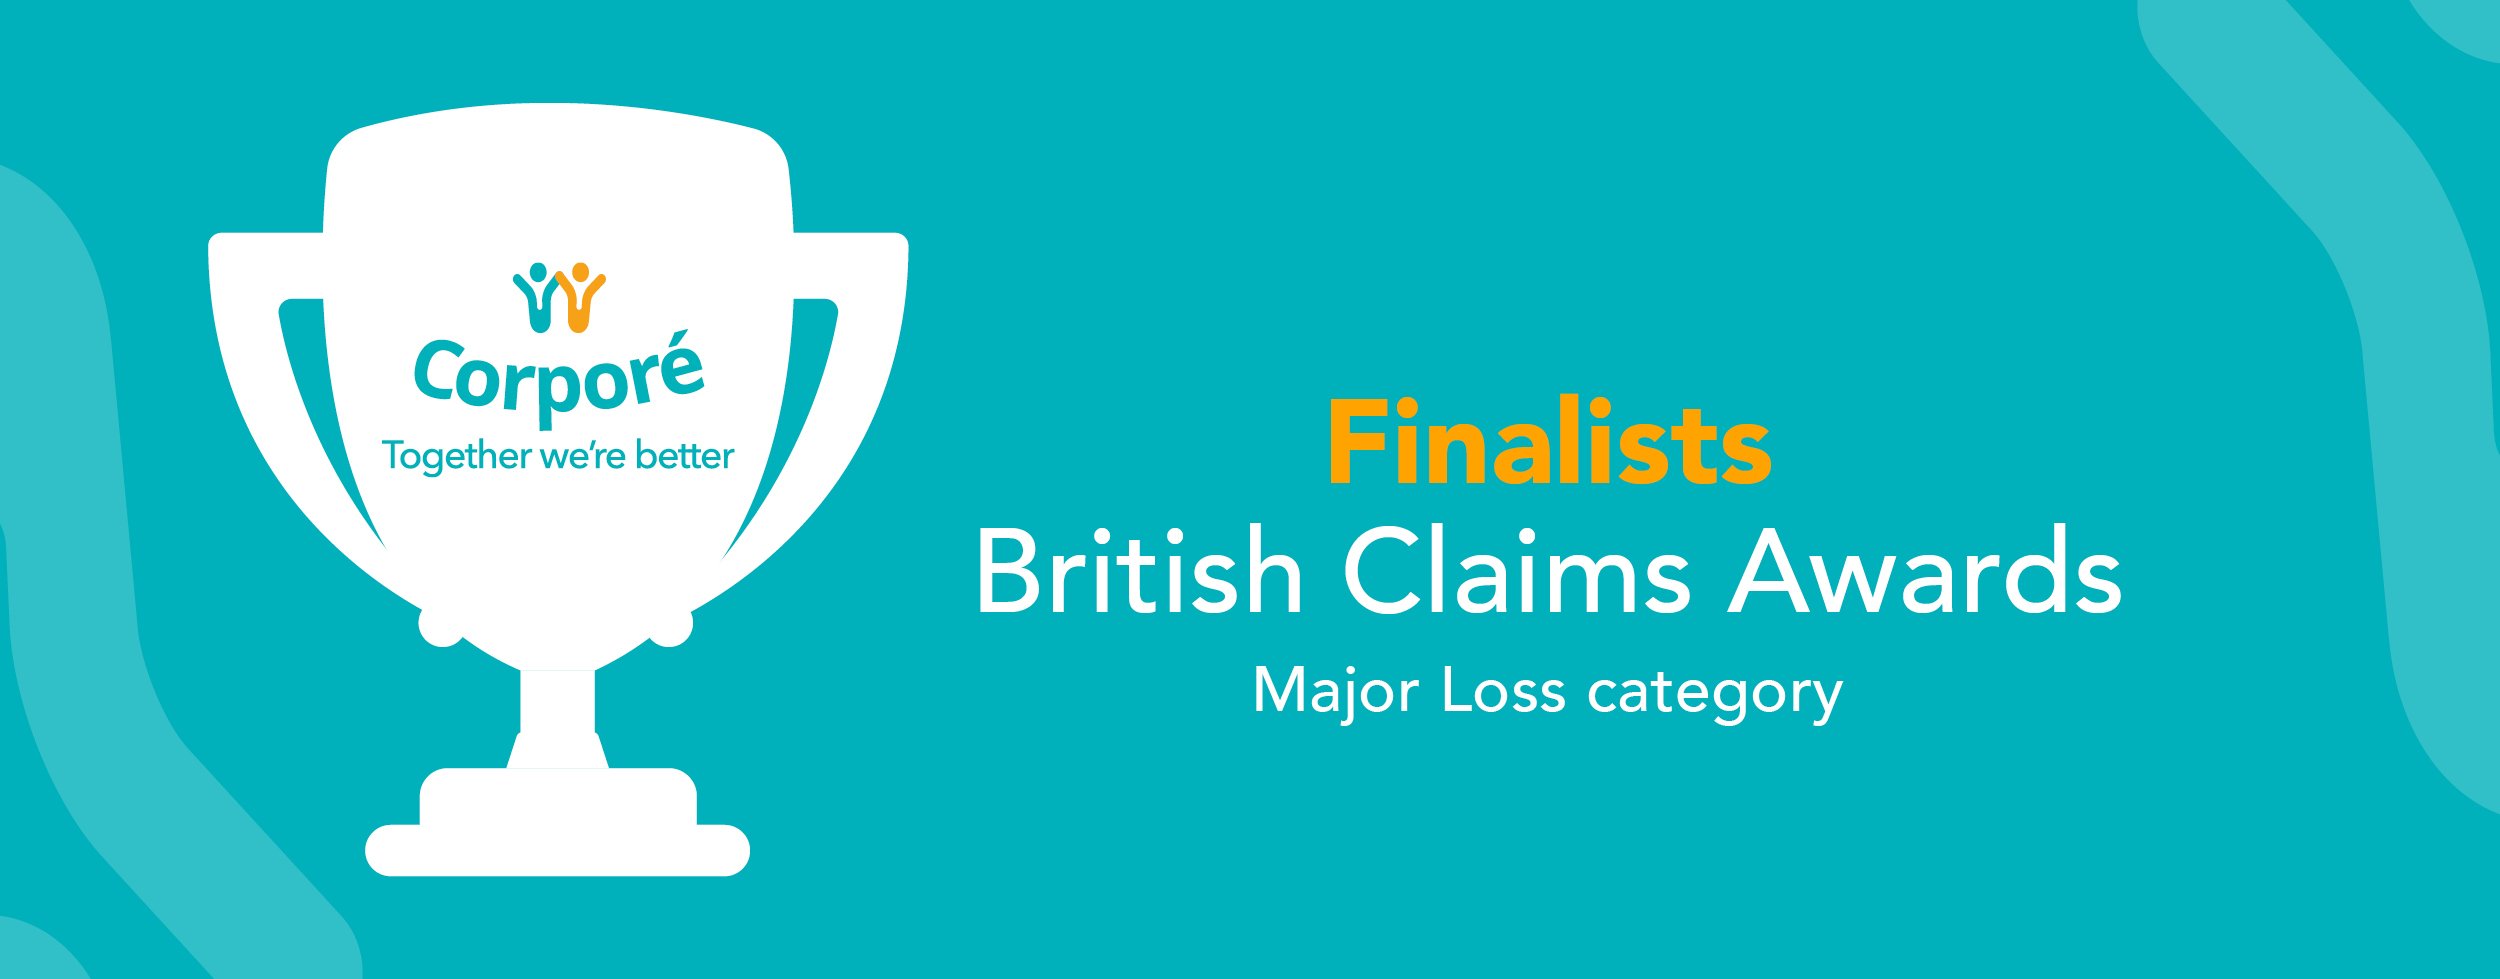 Corporé shortlisted as a finalist in the Major Loss category at the British Claims Awards